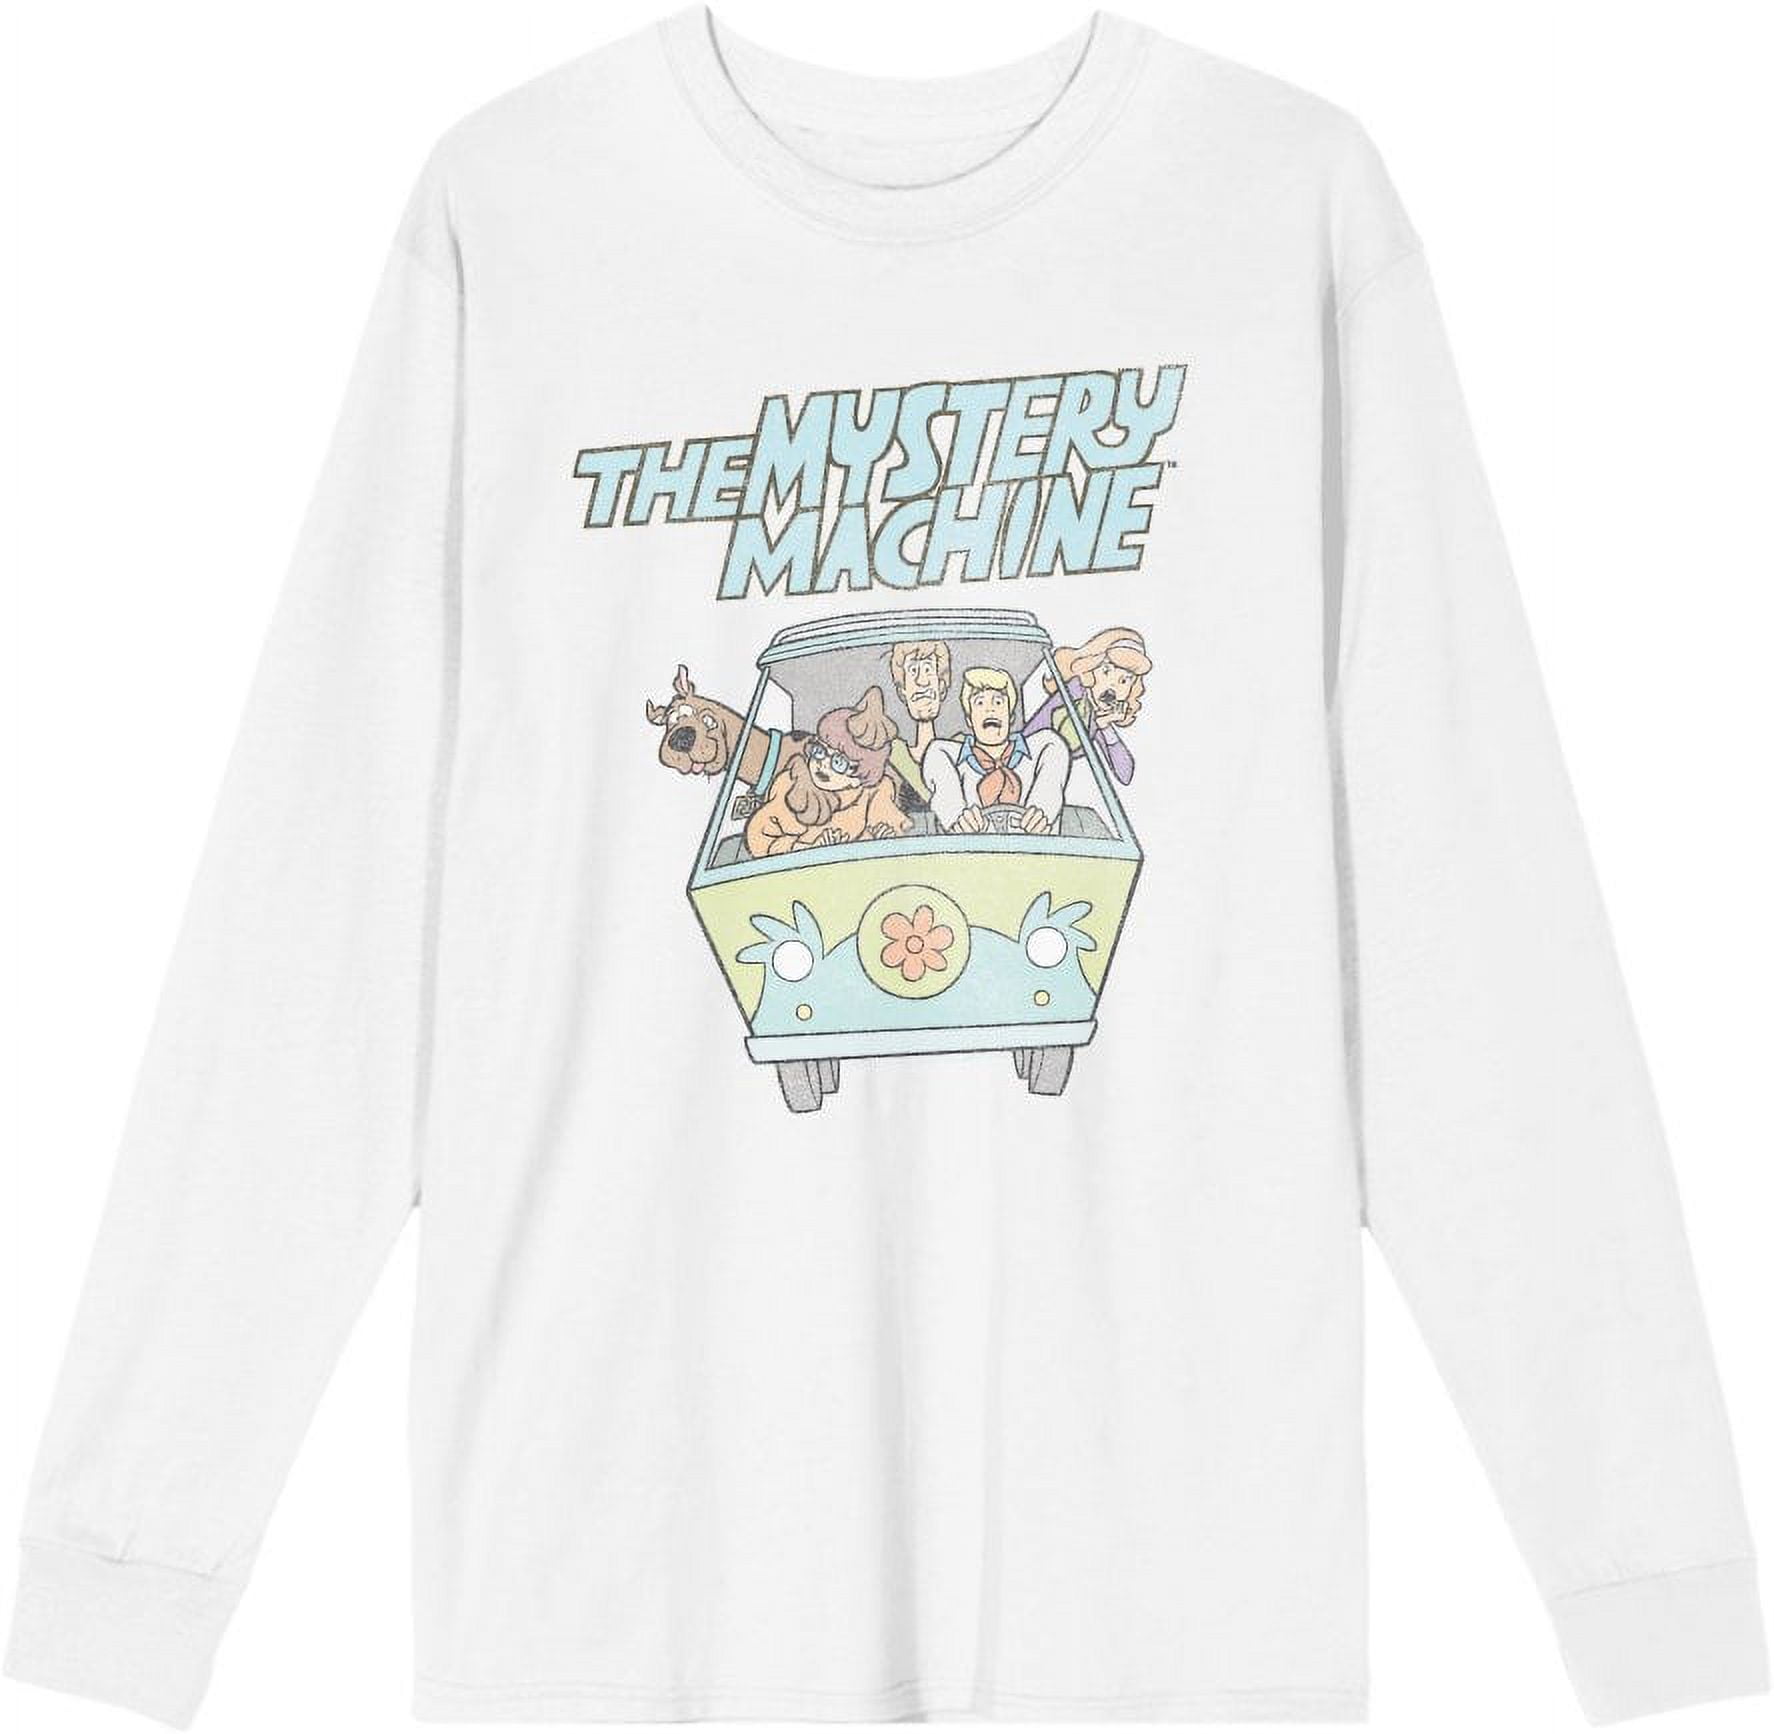 Scooby Doo The Mystery Machine Adult White Crew Neck Long Sleeve Tee-XL ...